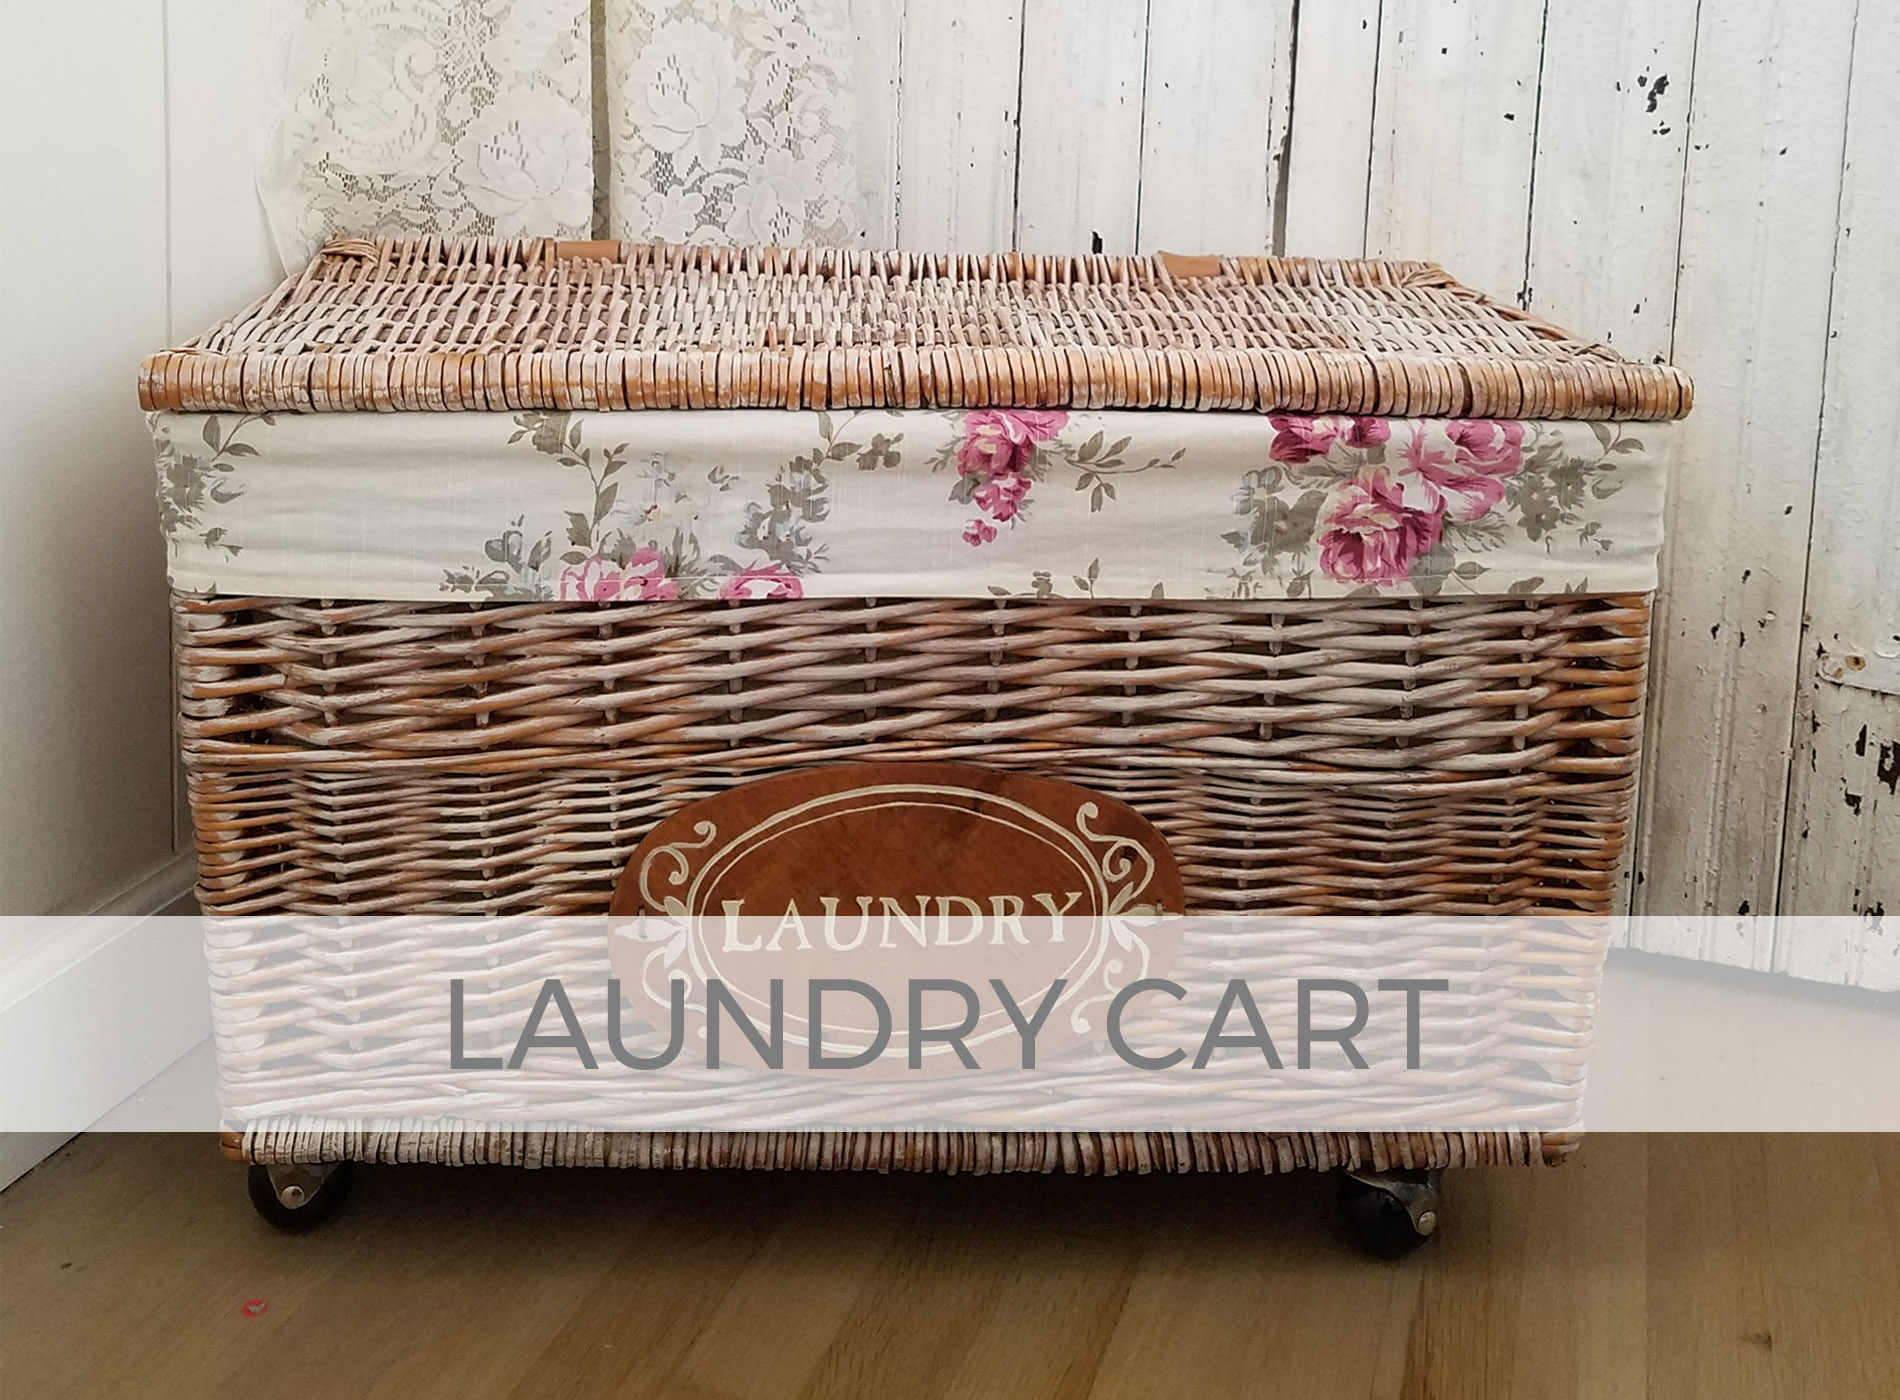 Large Basket Repurposed as Laundry Cart by Larissa of Prodigal Pieces | prodigalpieces.com